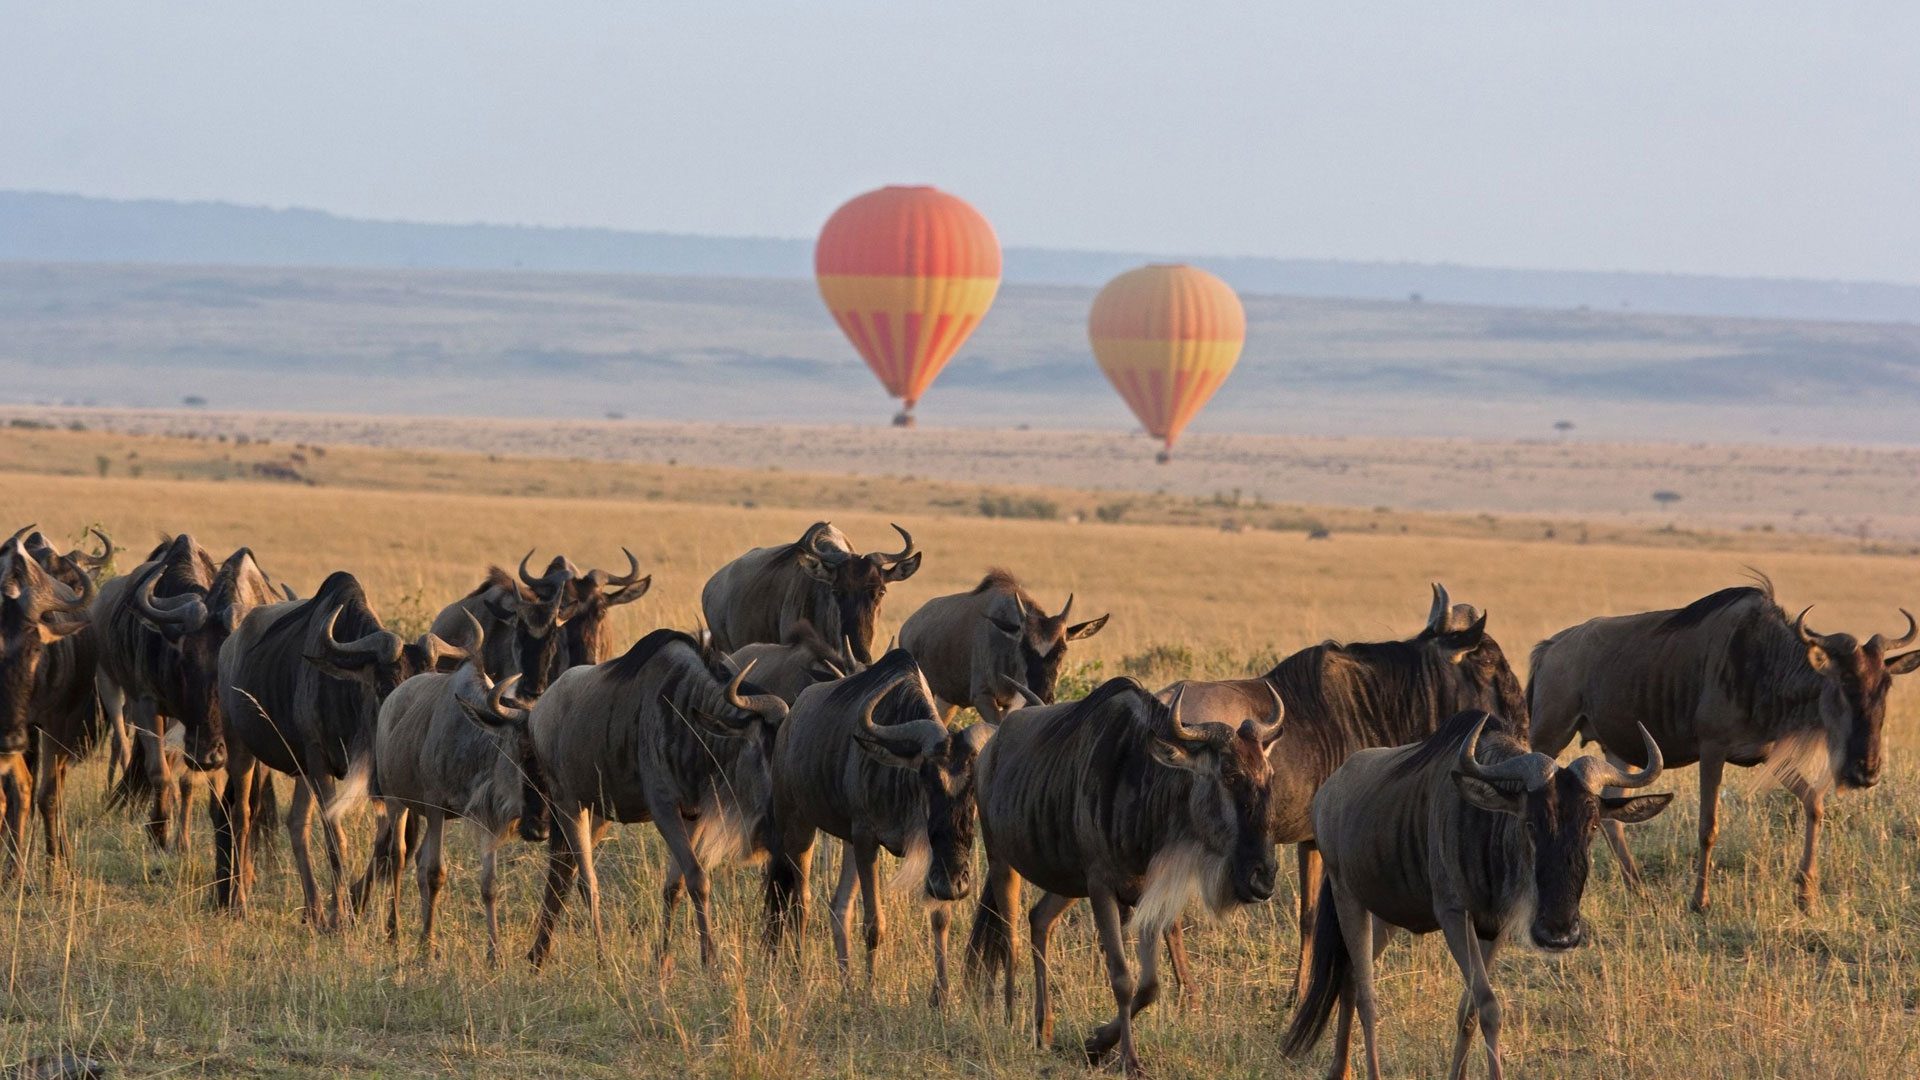 wildebeest migration with hot air balloons